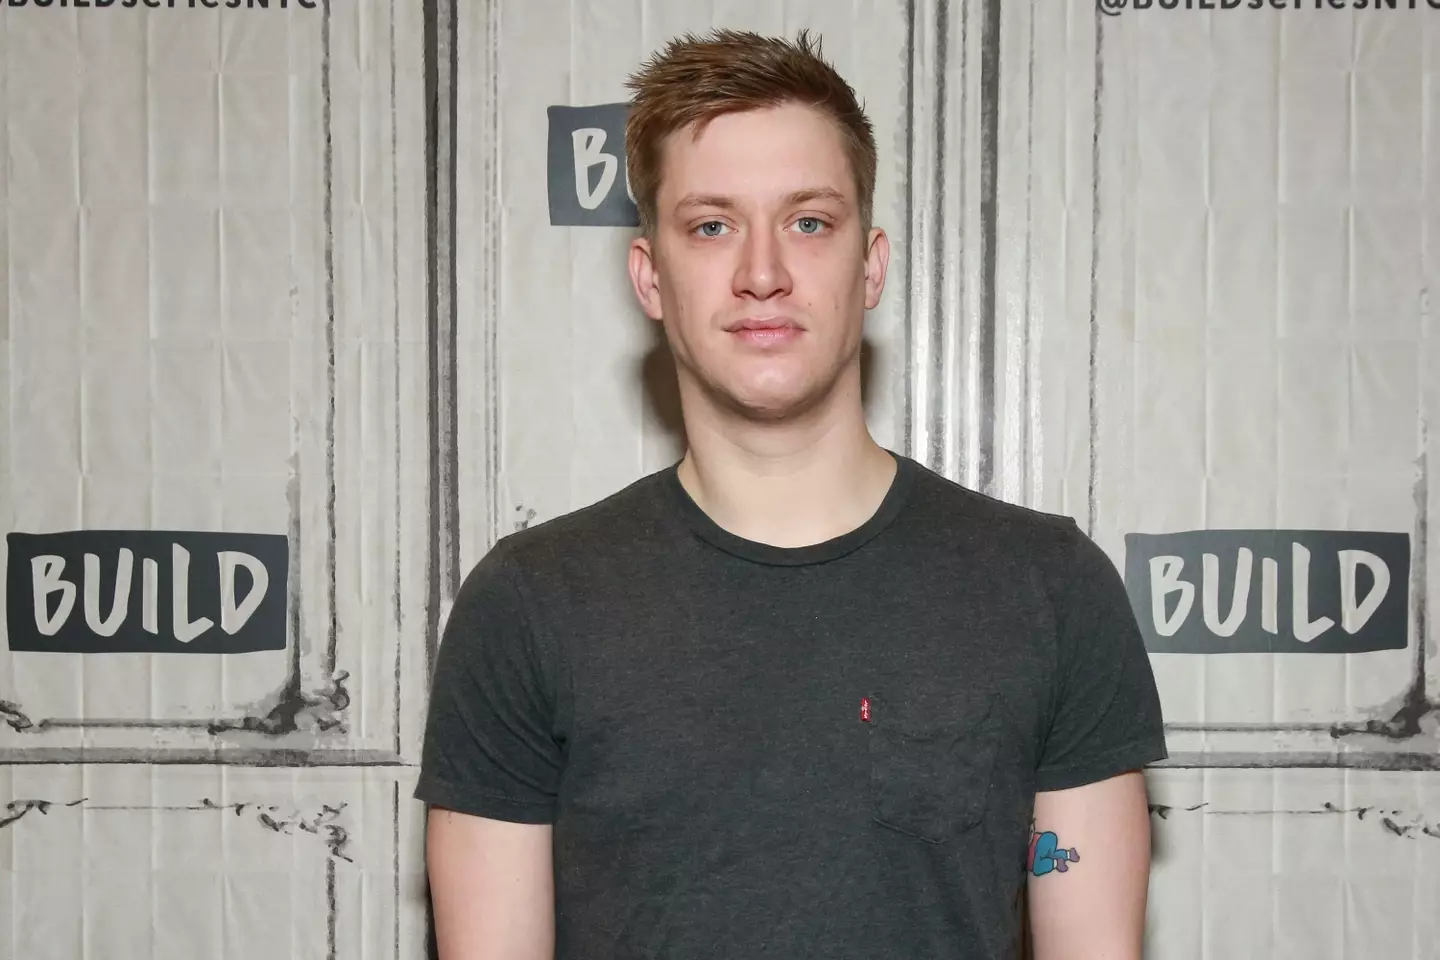 Daniel Sloss agreed to speak to Channel 4 Dispatches about Brand.